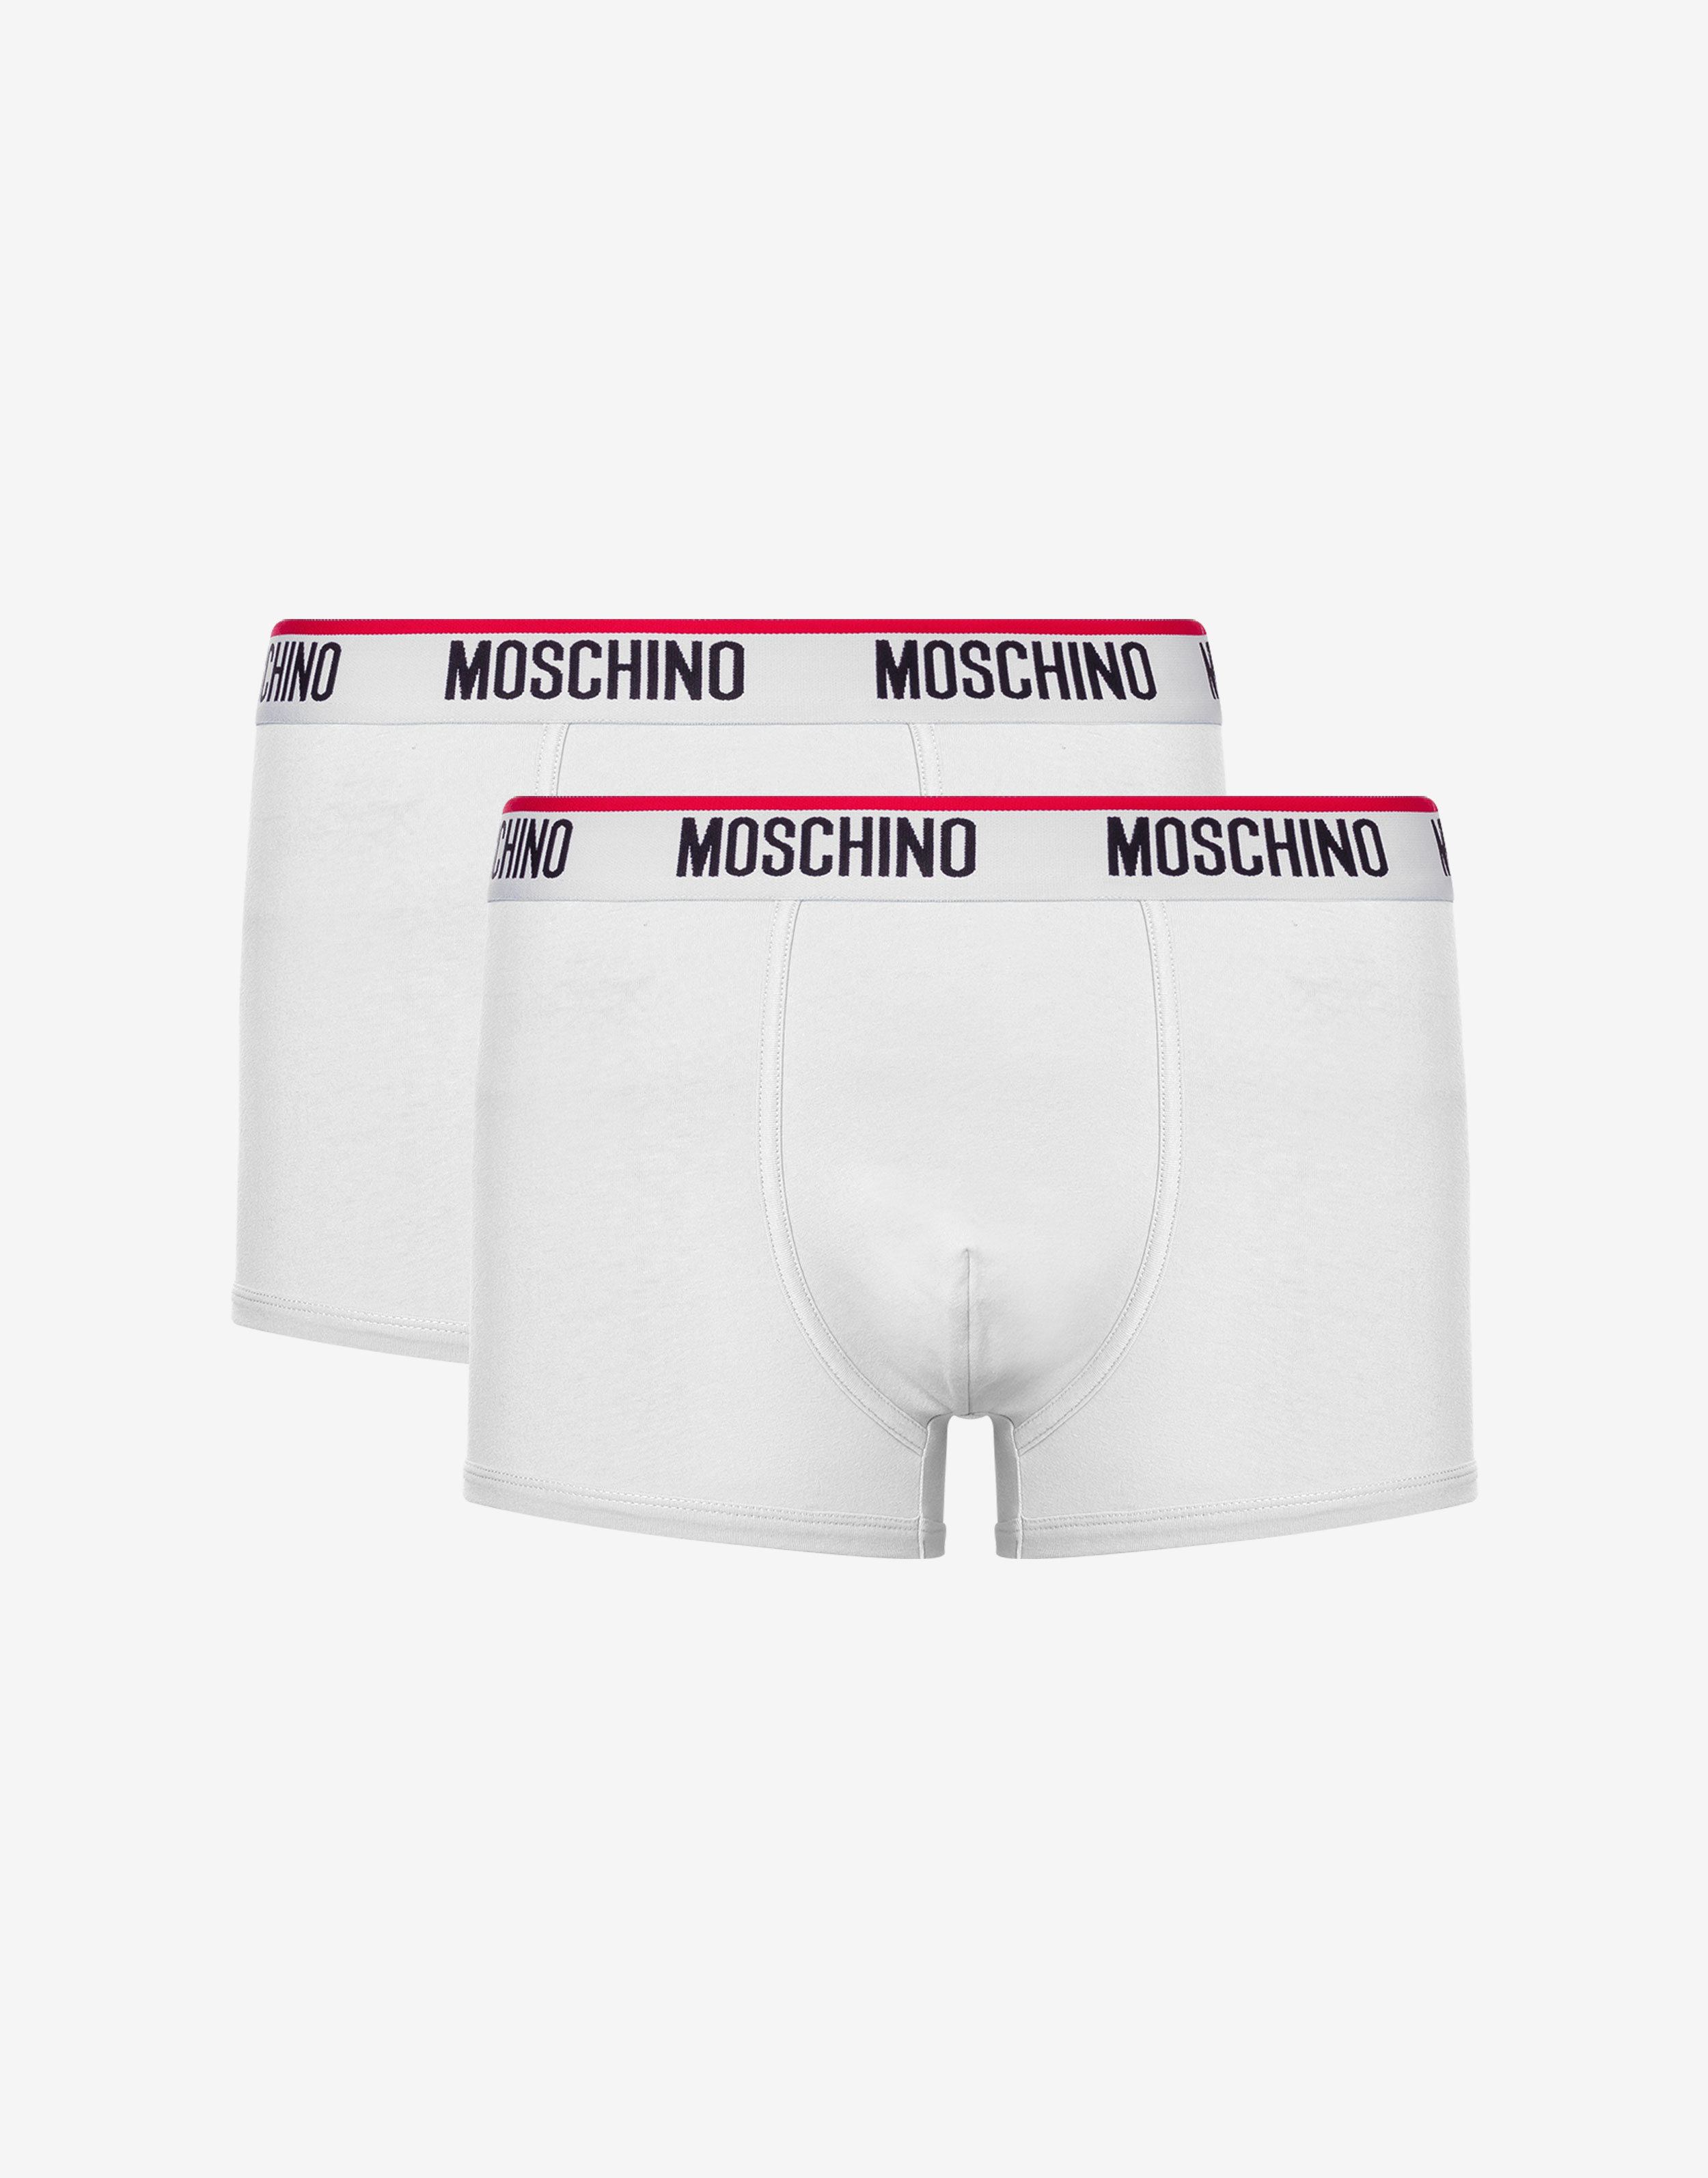 Moschino Underwear 2 Pack Boxers Red - AbuMaizar Dental Roots Clinic